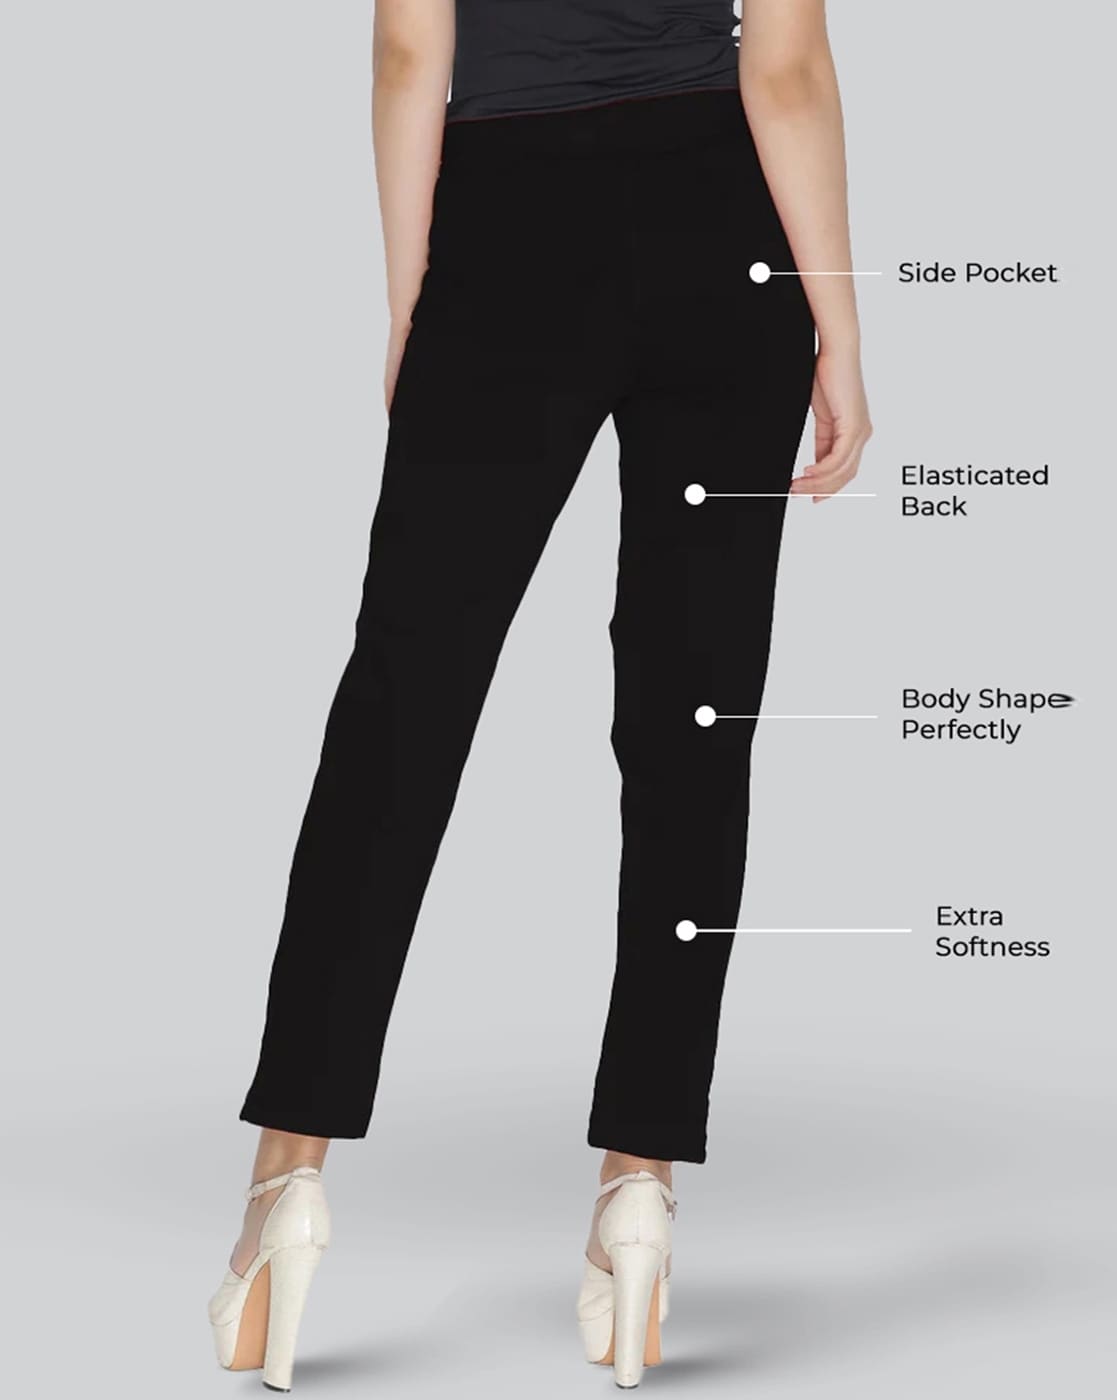 Lyra Women's Pants (LYRA_KURTIPANT_18_FS_1PC) - Parry Red (L) in Bangalore  at best price by Yogesh Enterprises - Justdial